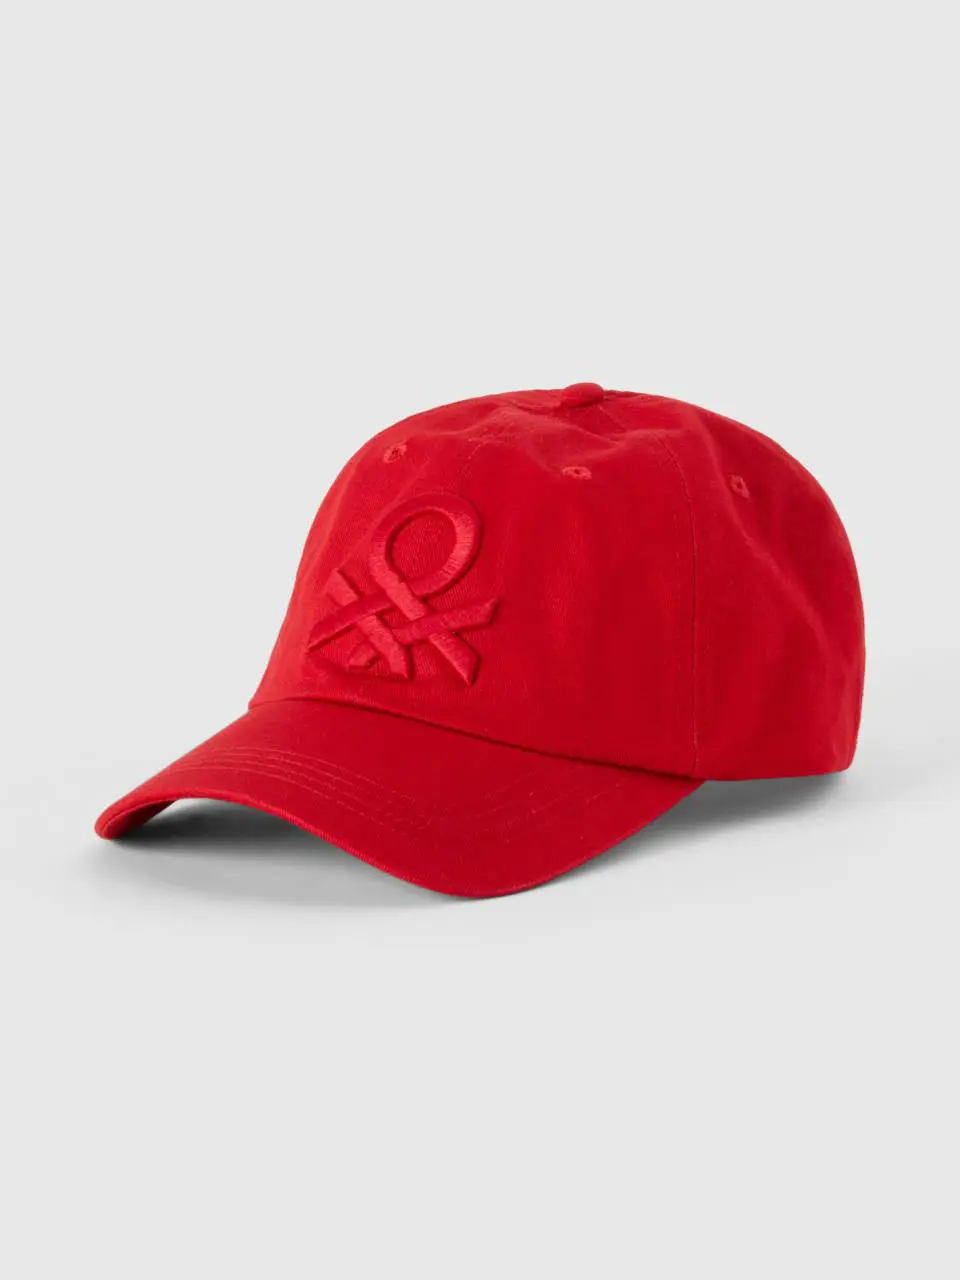 Benetton red baseball cap with washed look. 1